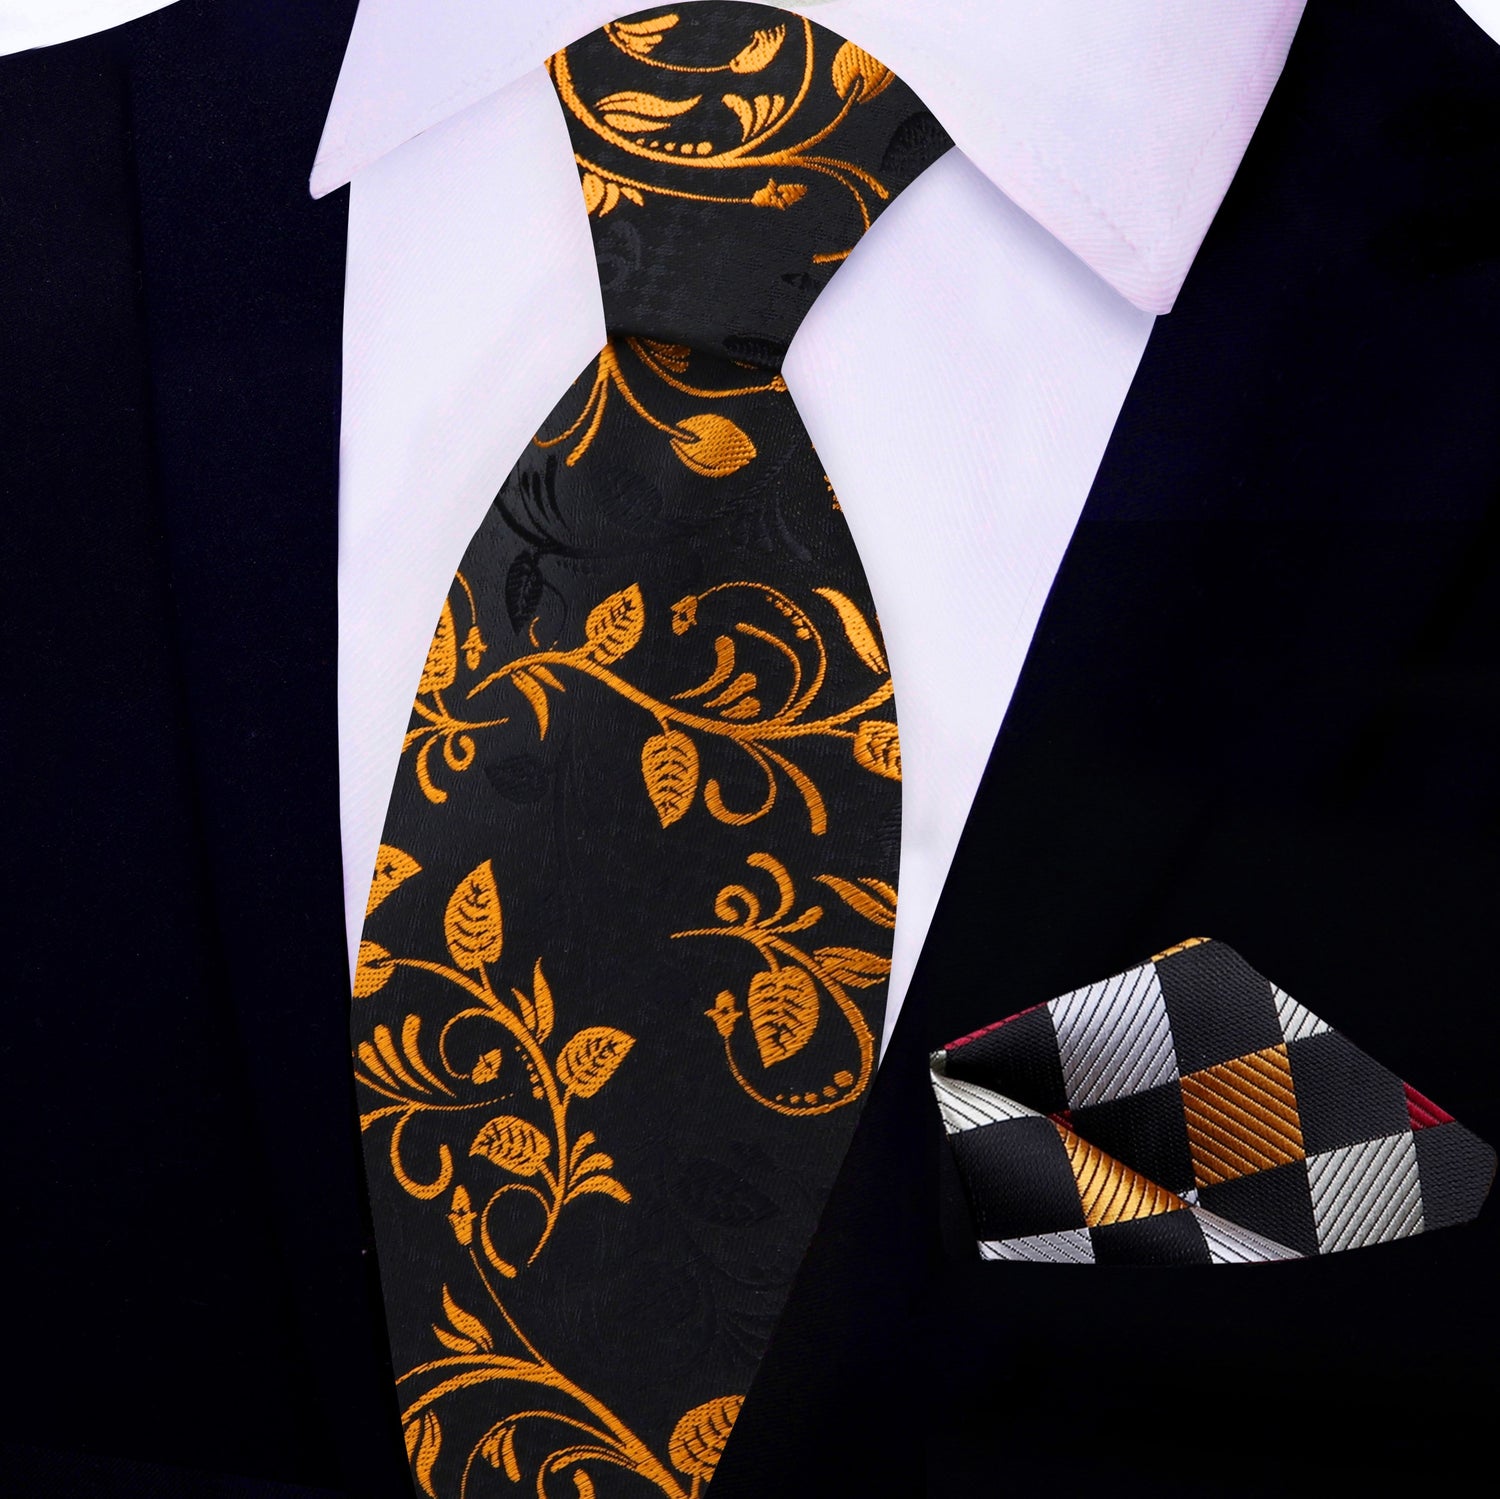 Black and Gold Vines Tie with Black, Gold, Silver Burgundy Check Pocket Square